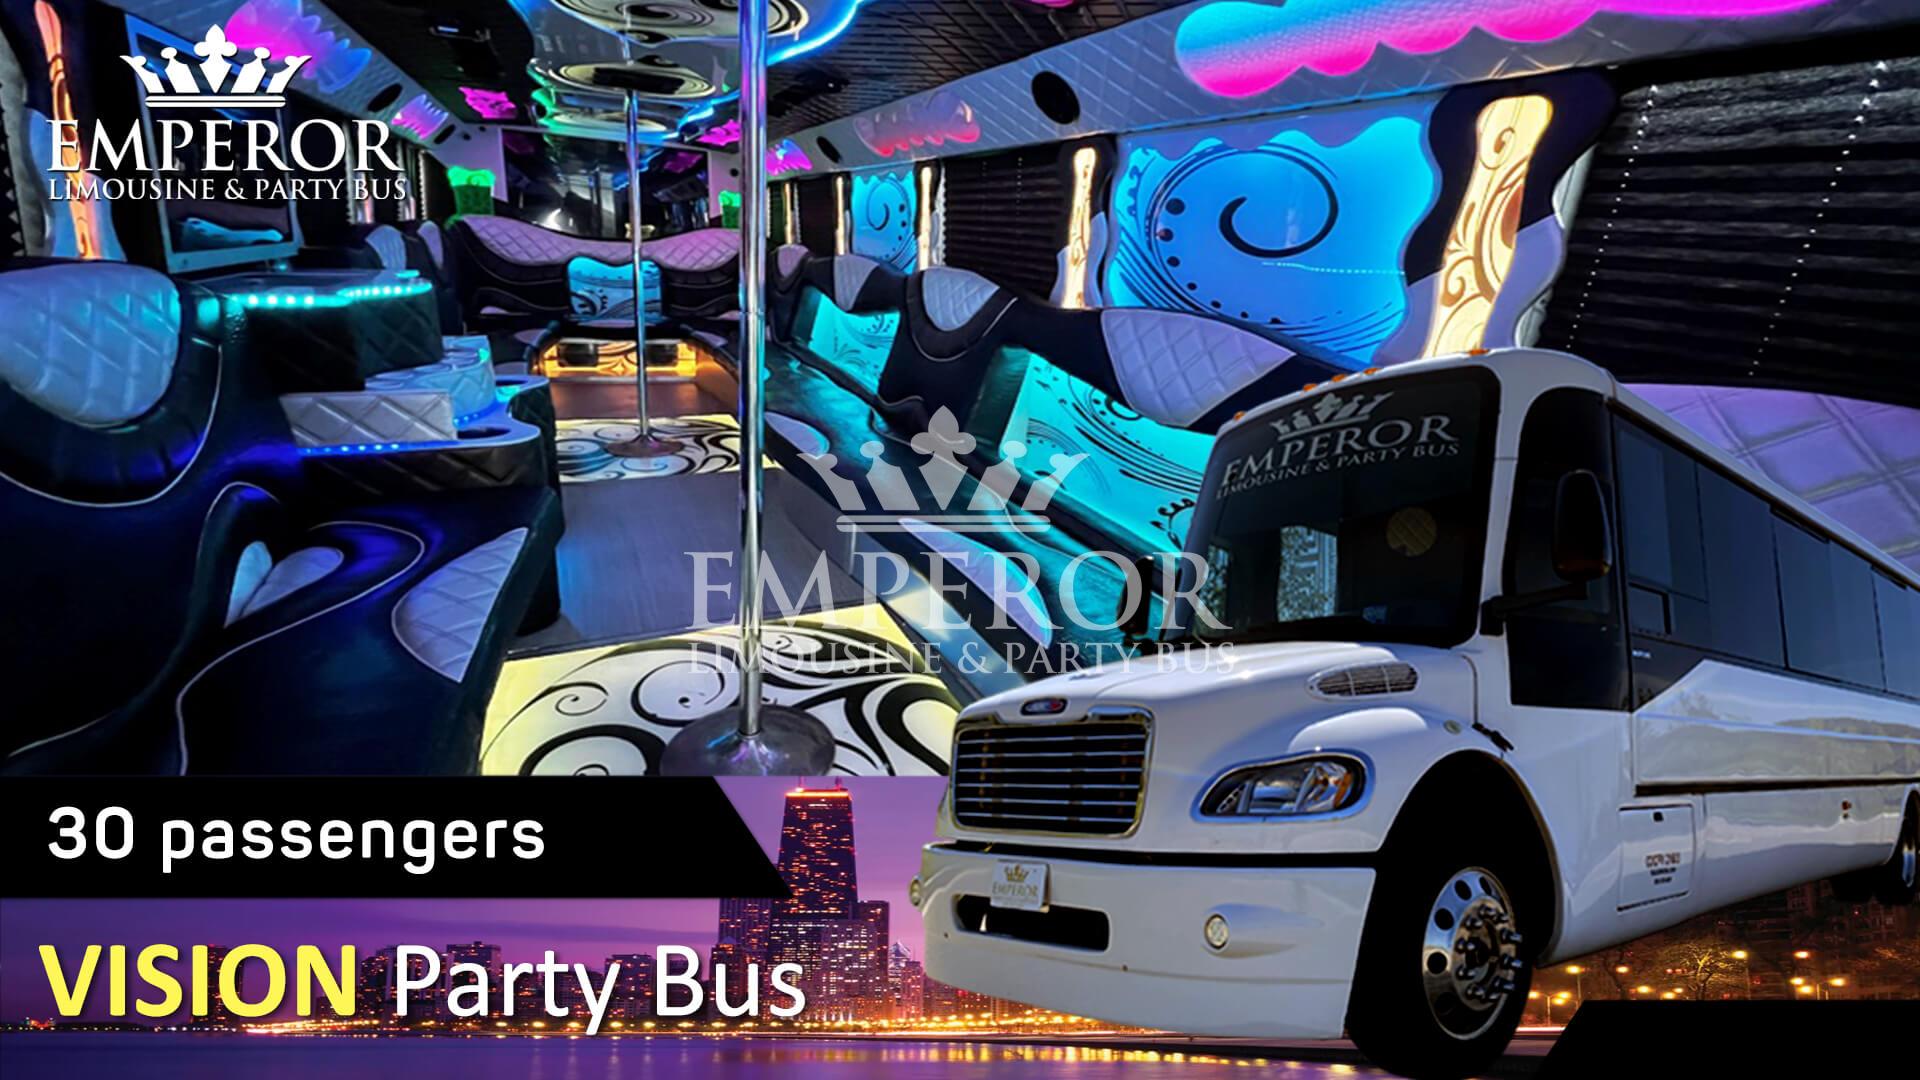 Broadview party bus - Vision Edition